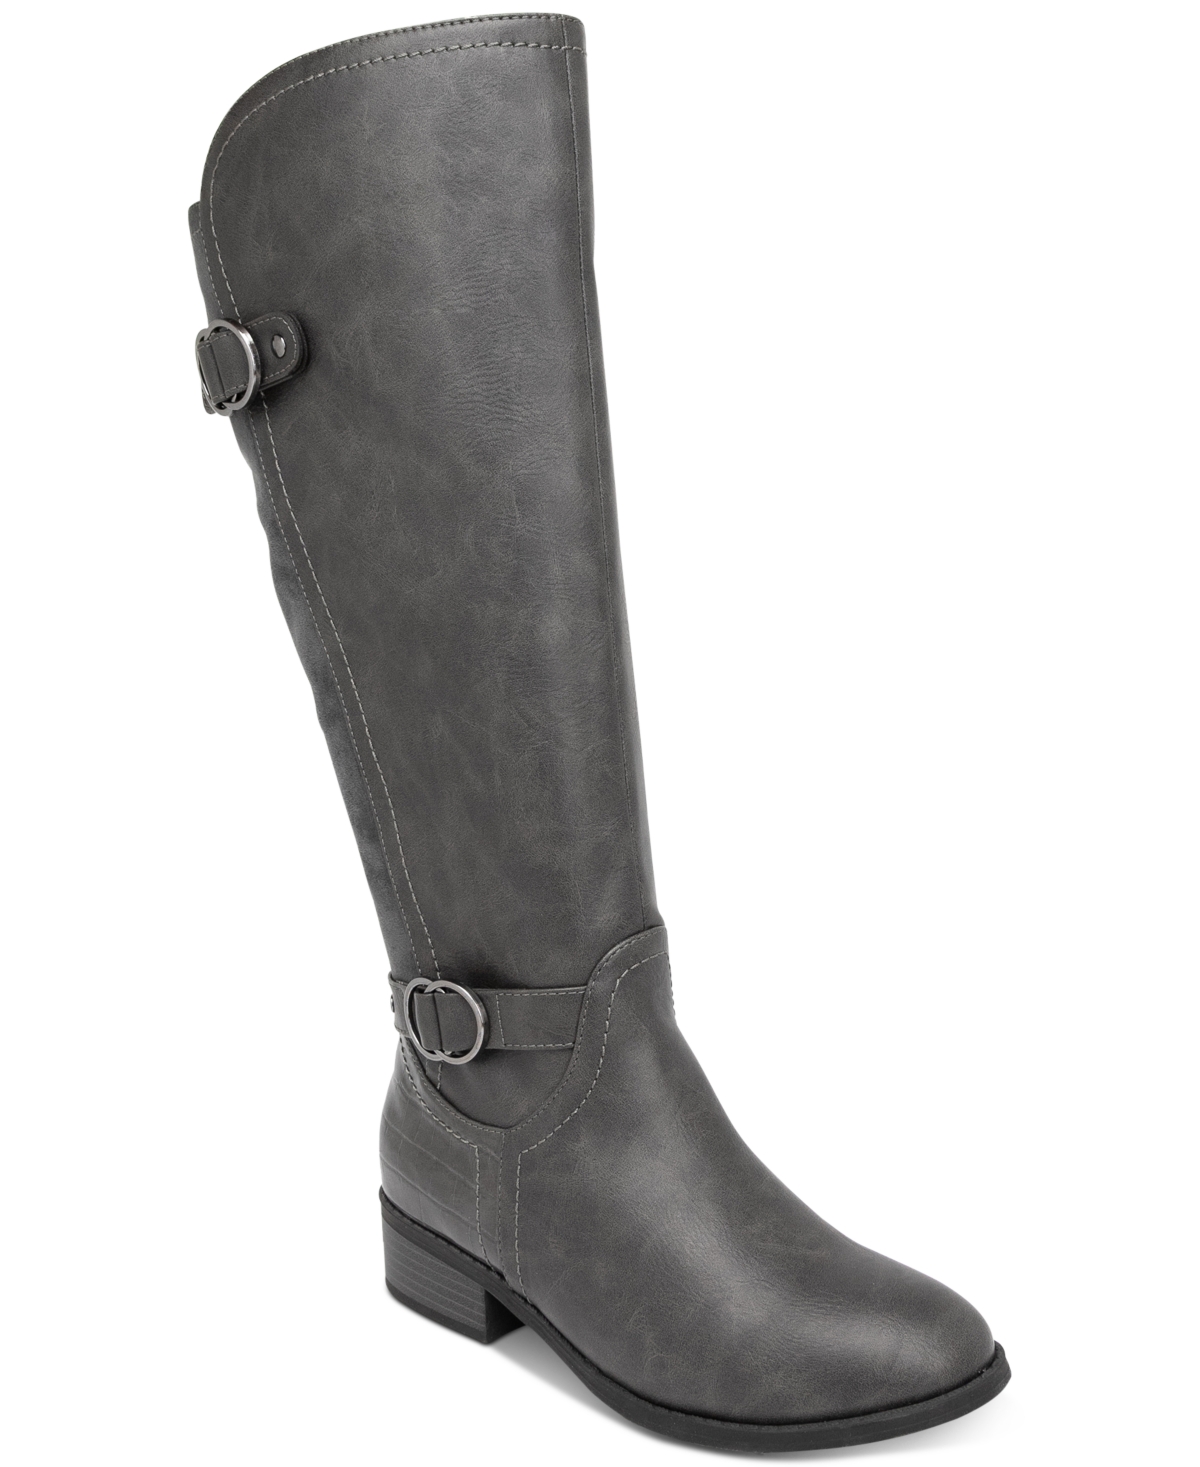 Leandraa Riding Boots, Created for Macy's - Grey